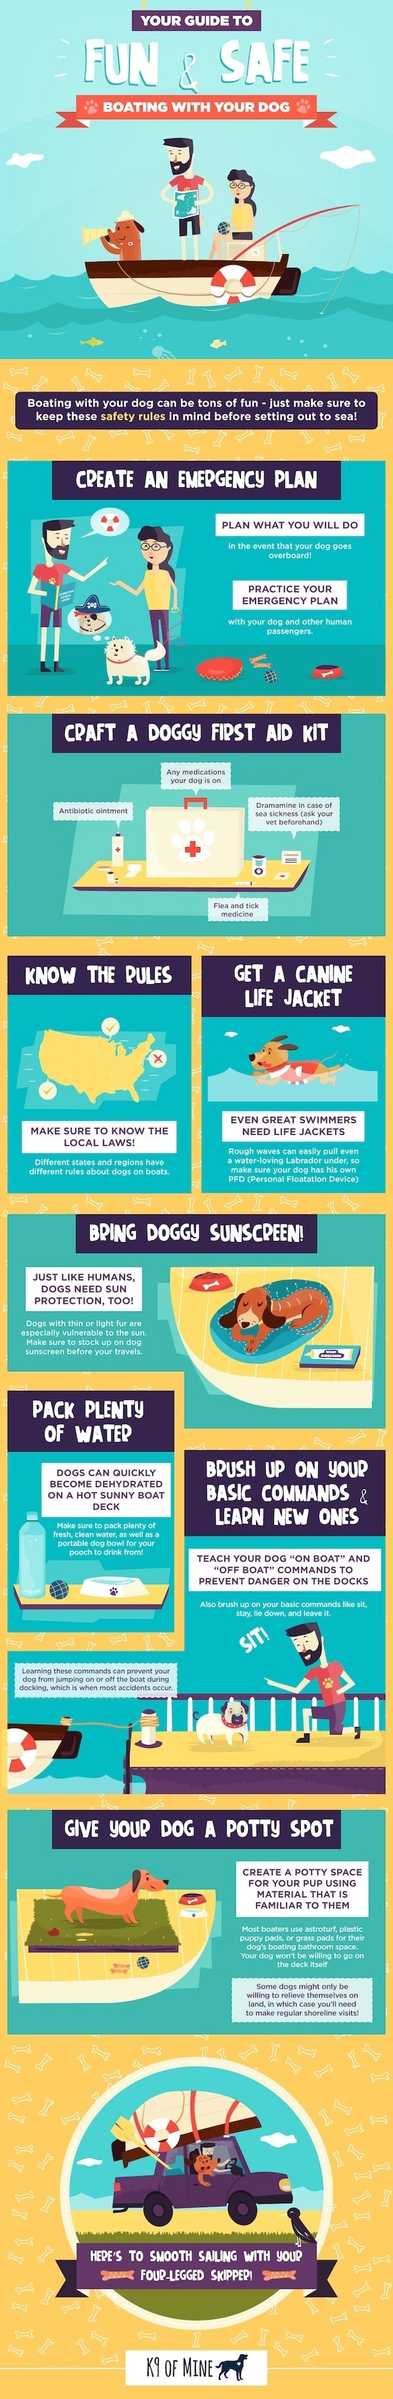 Your Guide to Boating with Your Dog